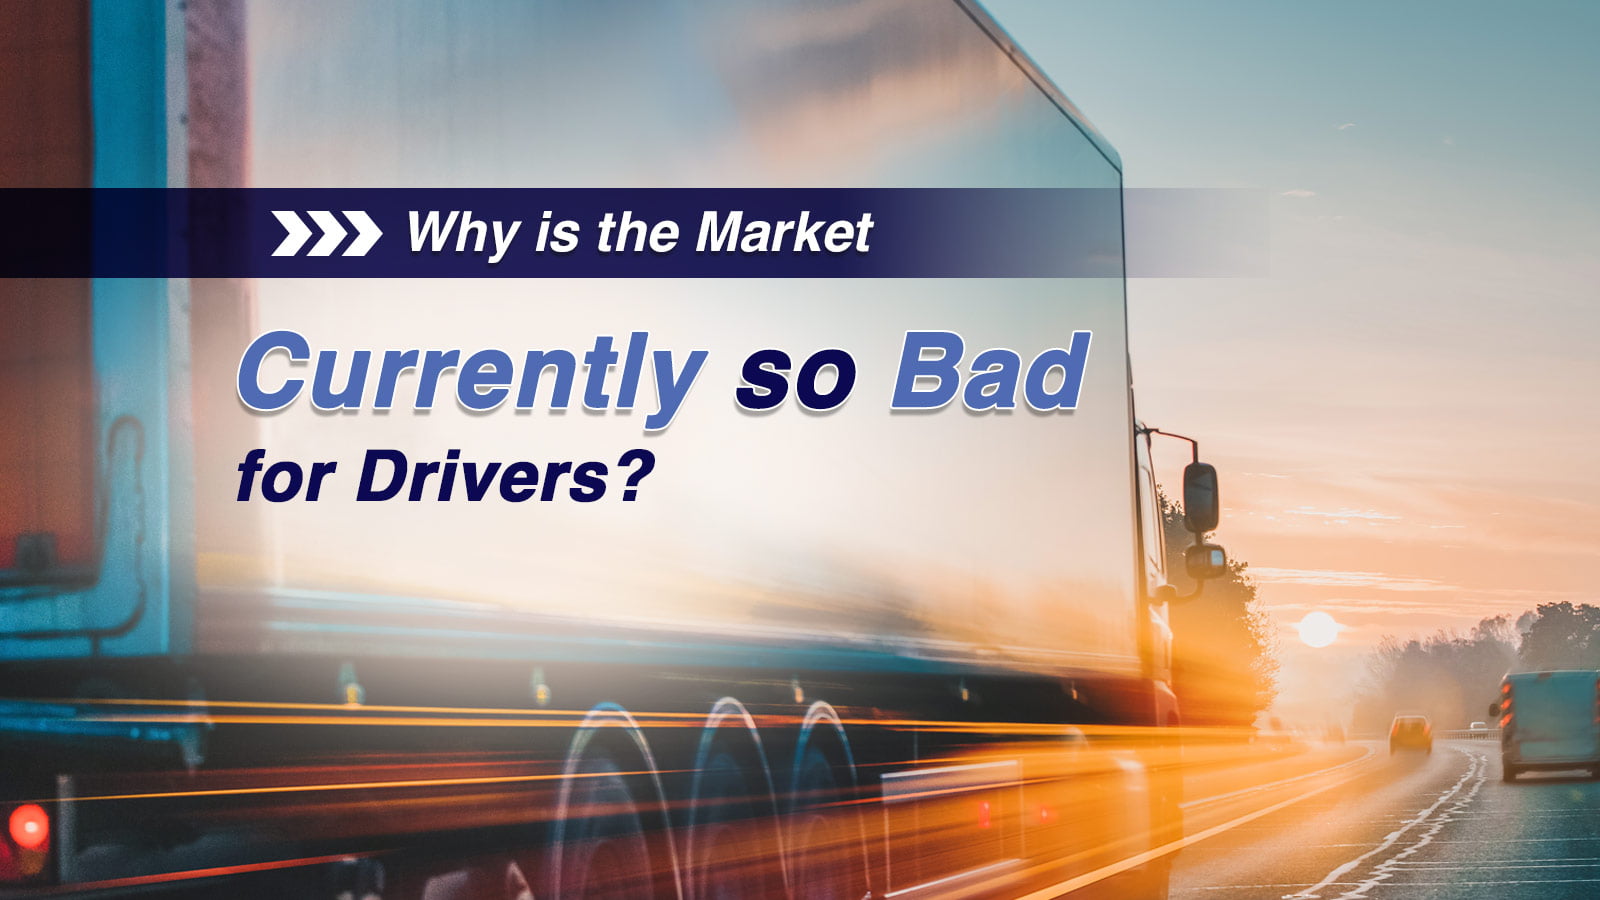 Why is the market currently so bad for drivers